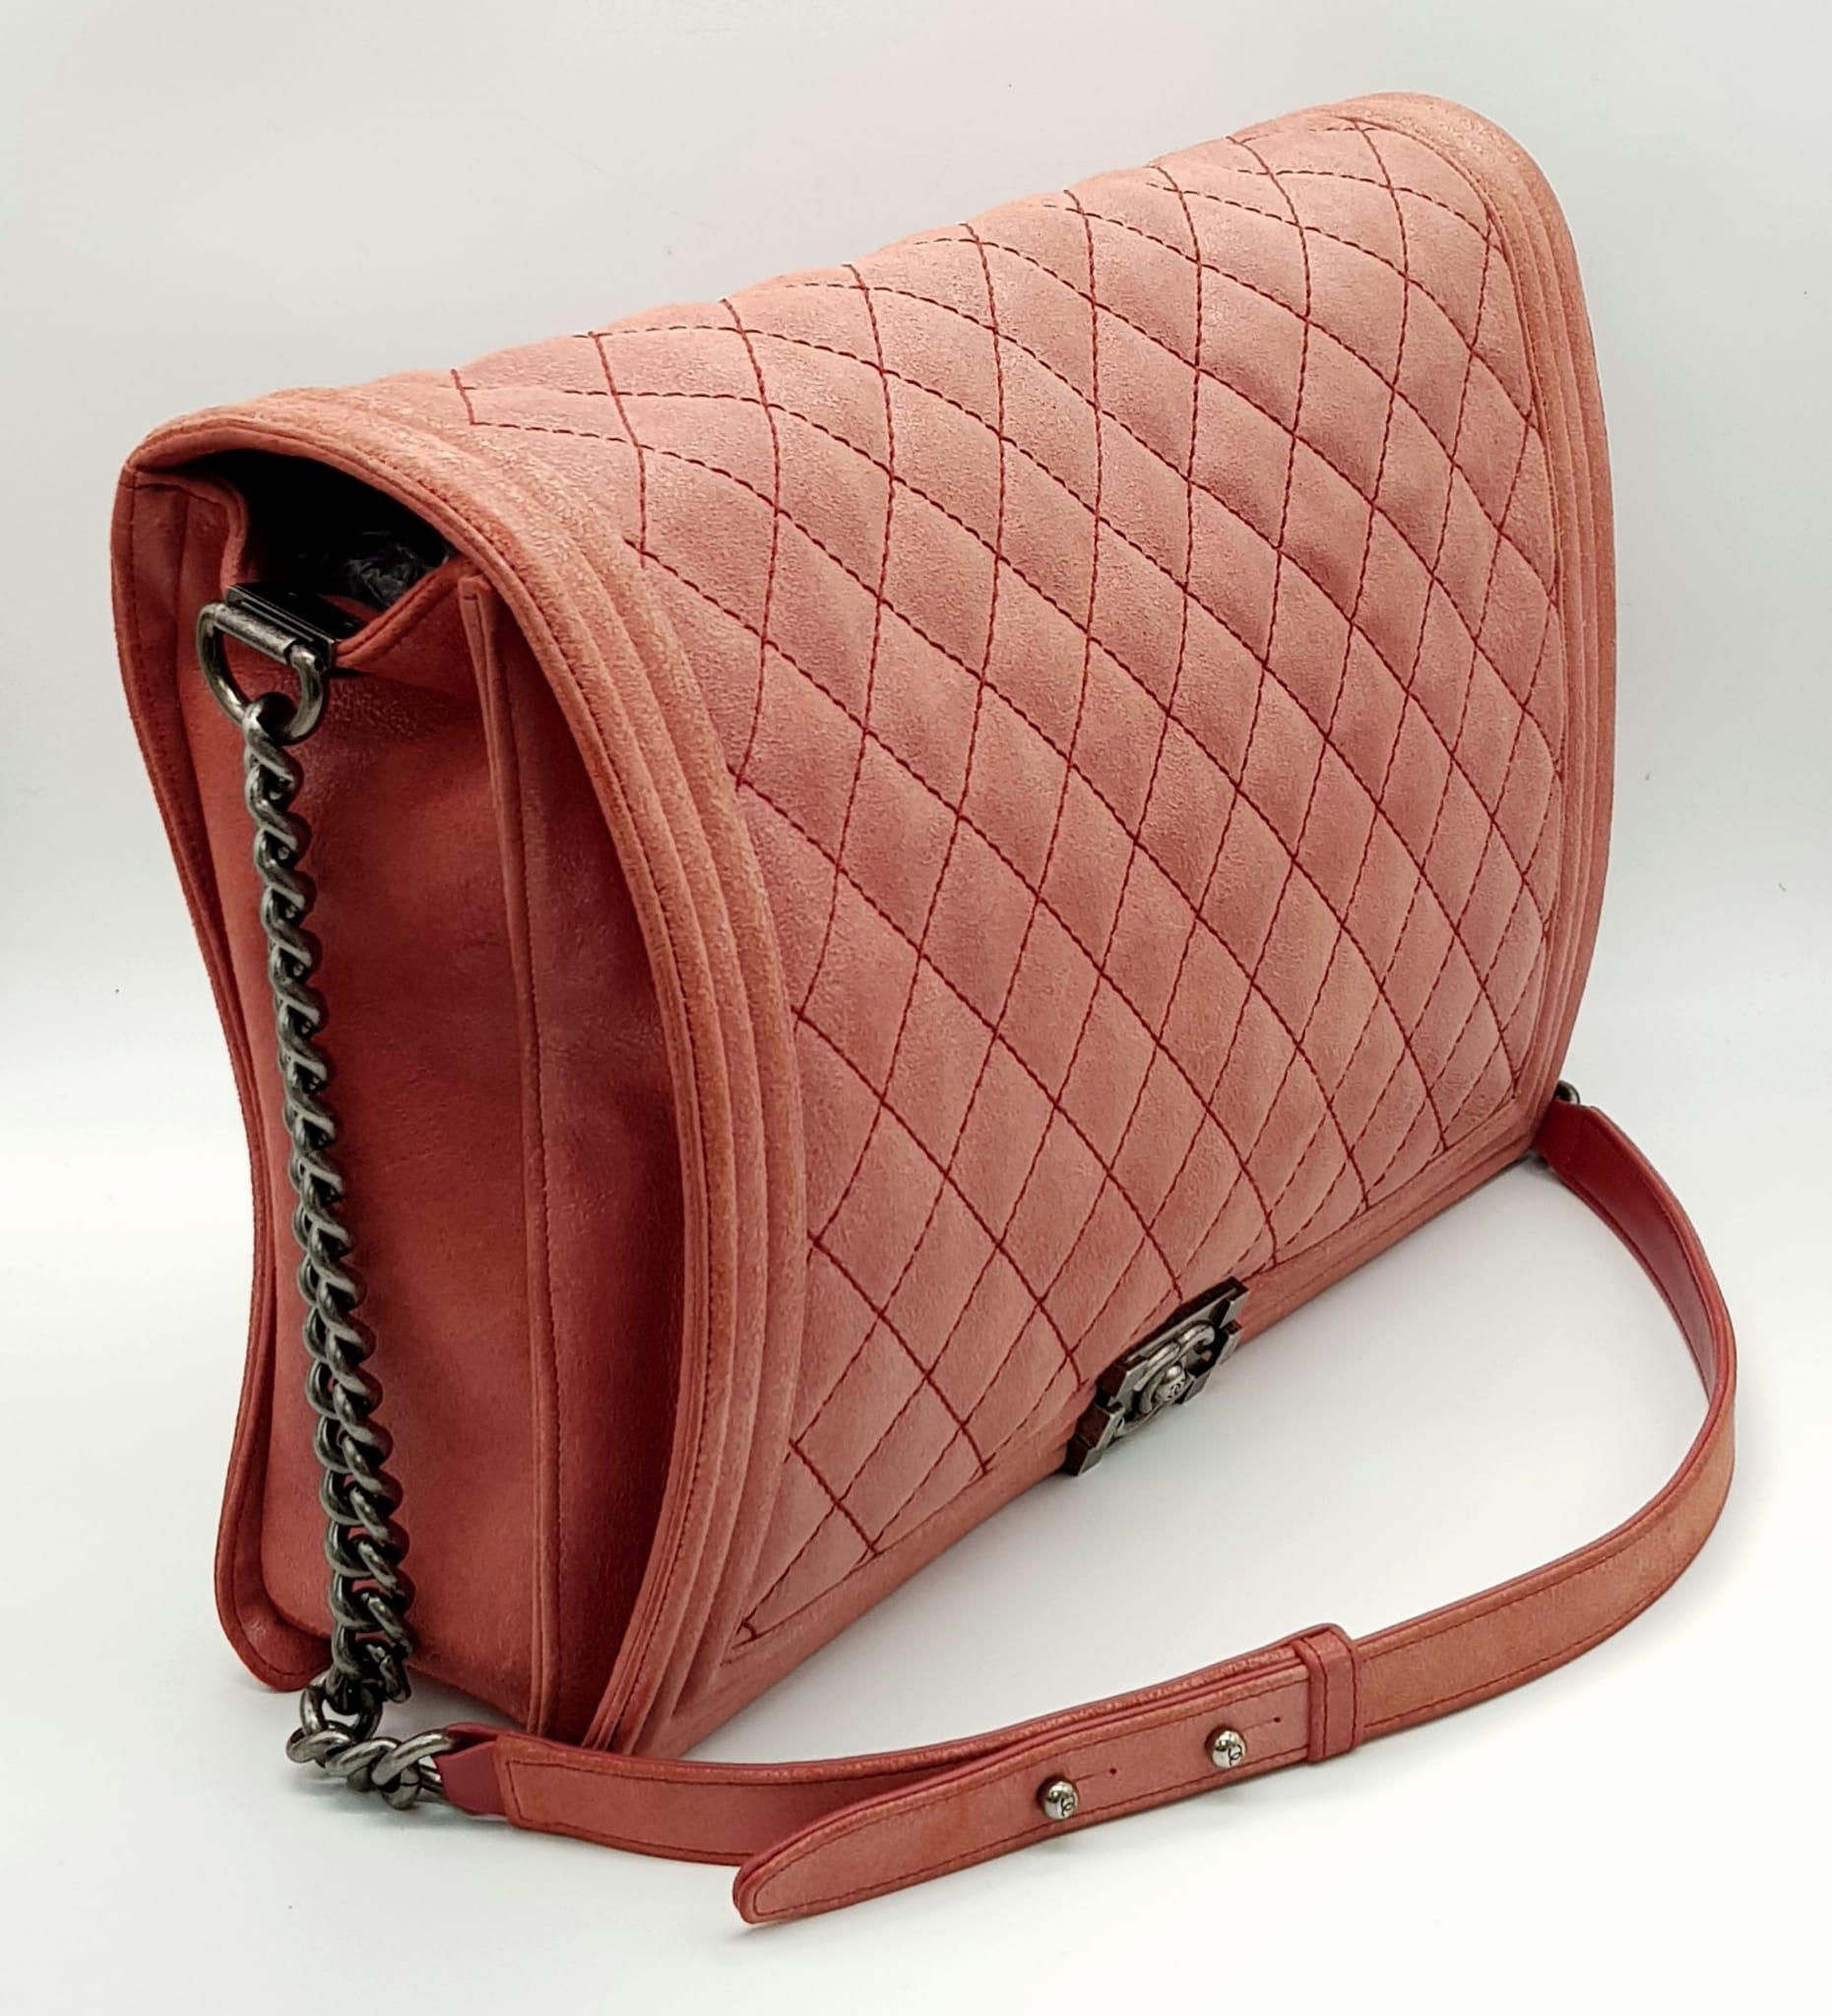 A Chanel Maxi Boy Shoulder Bag. Pink quilted suede flap on leather. Heavy brushed steel finish on - Image 3 of 9